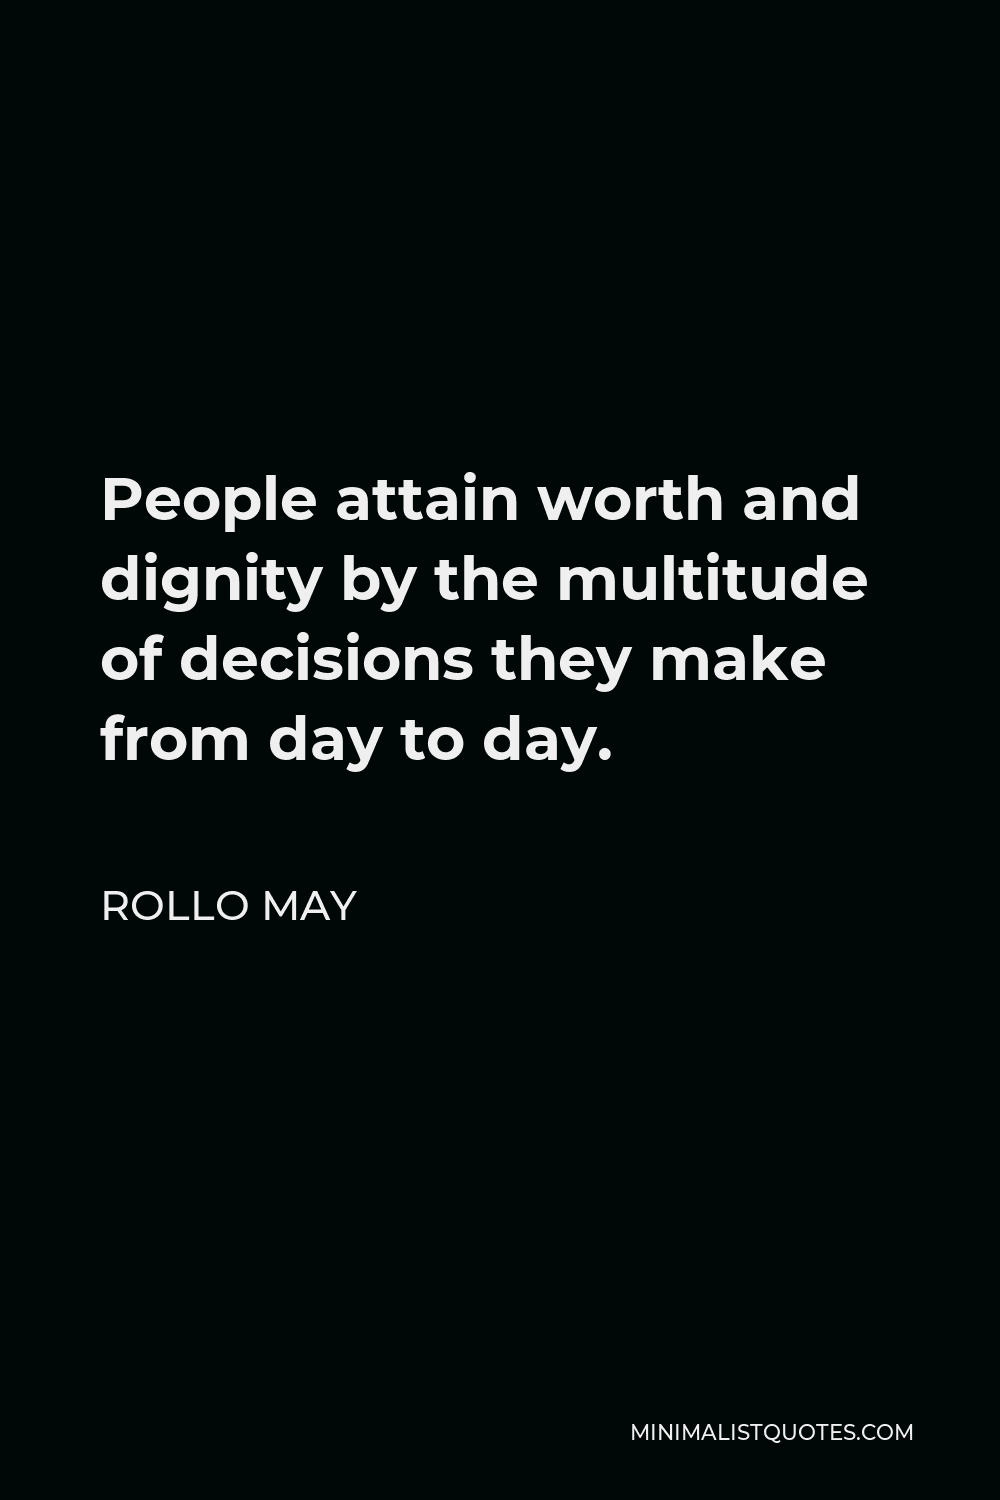 Rollo May Quote - People attain worth and dignity by the multitude of decisions they make from day by day. These decisions require courage.